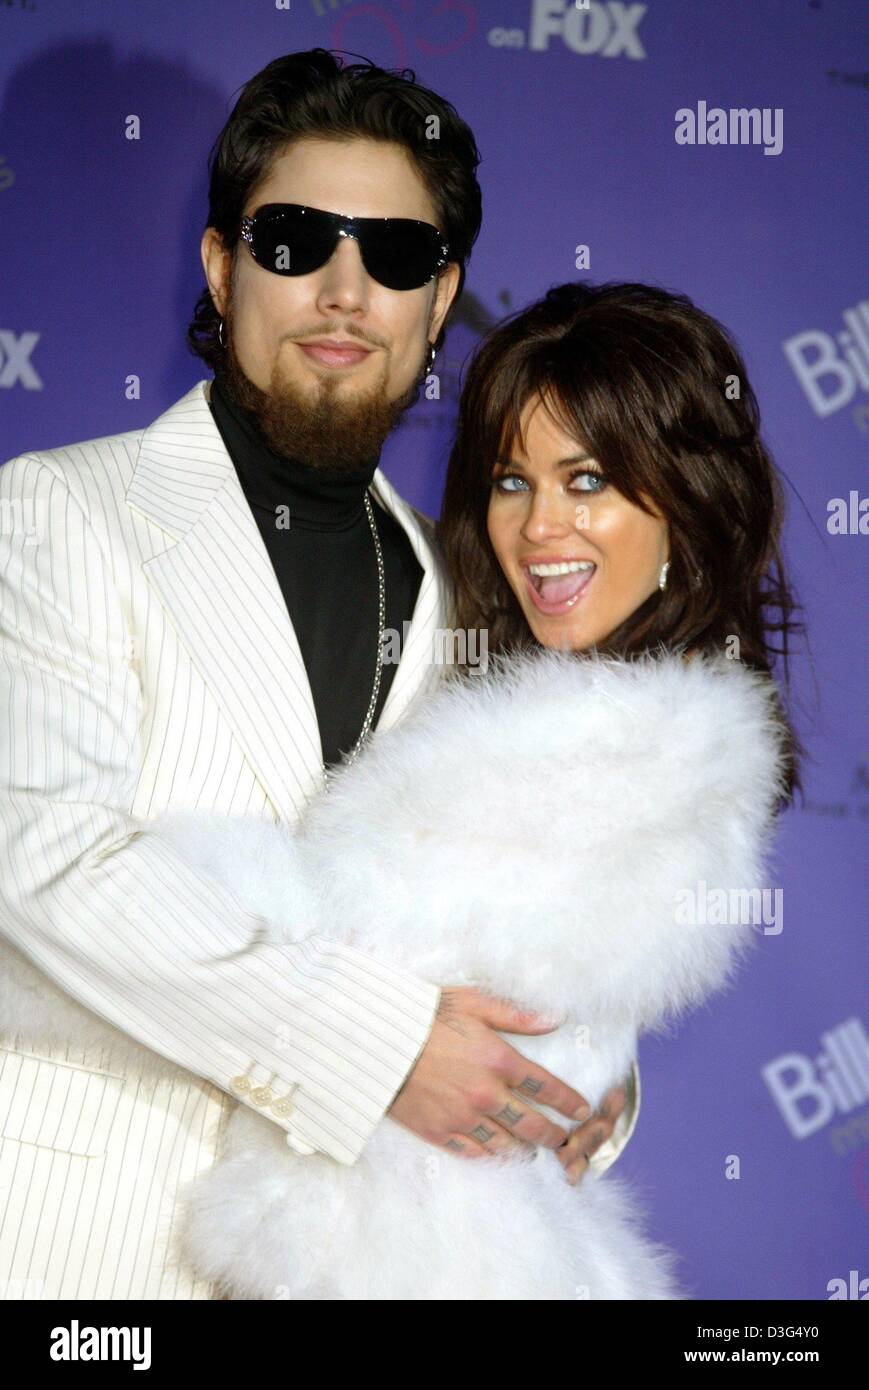 (dpa) - Musician Dave Navarro and his wife, US actress Carmen Electra, pose ahead of the Billboard awards show in Las Vegas, USA, 10 December 2003. The awards of the US music magazine Billboard were awarded for the 14th time. Stock Photo